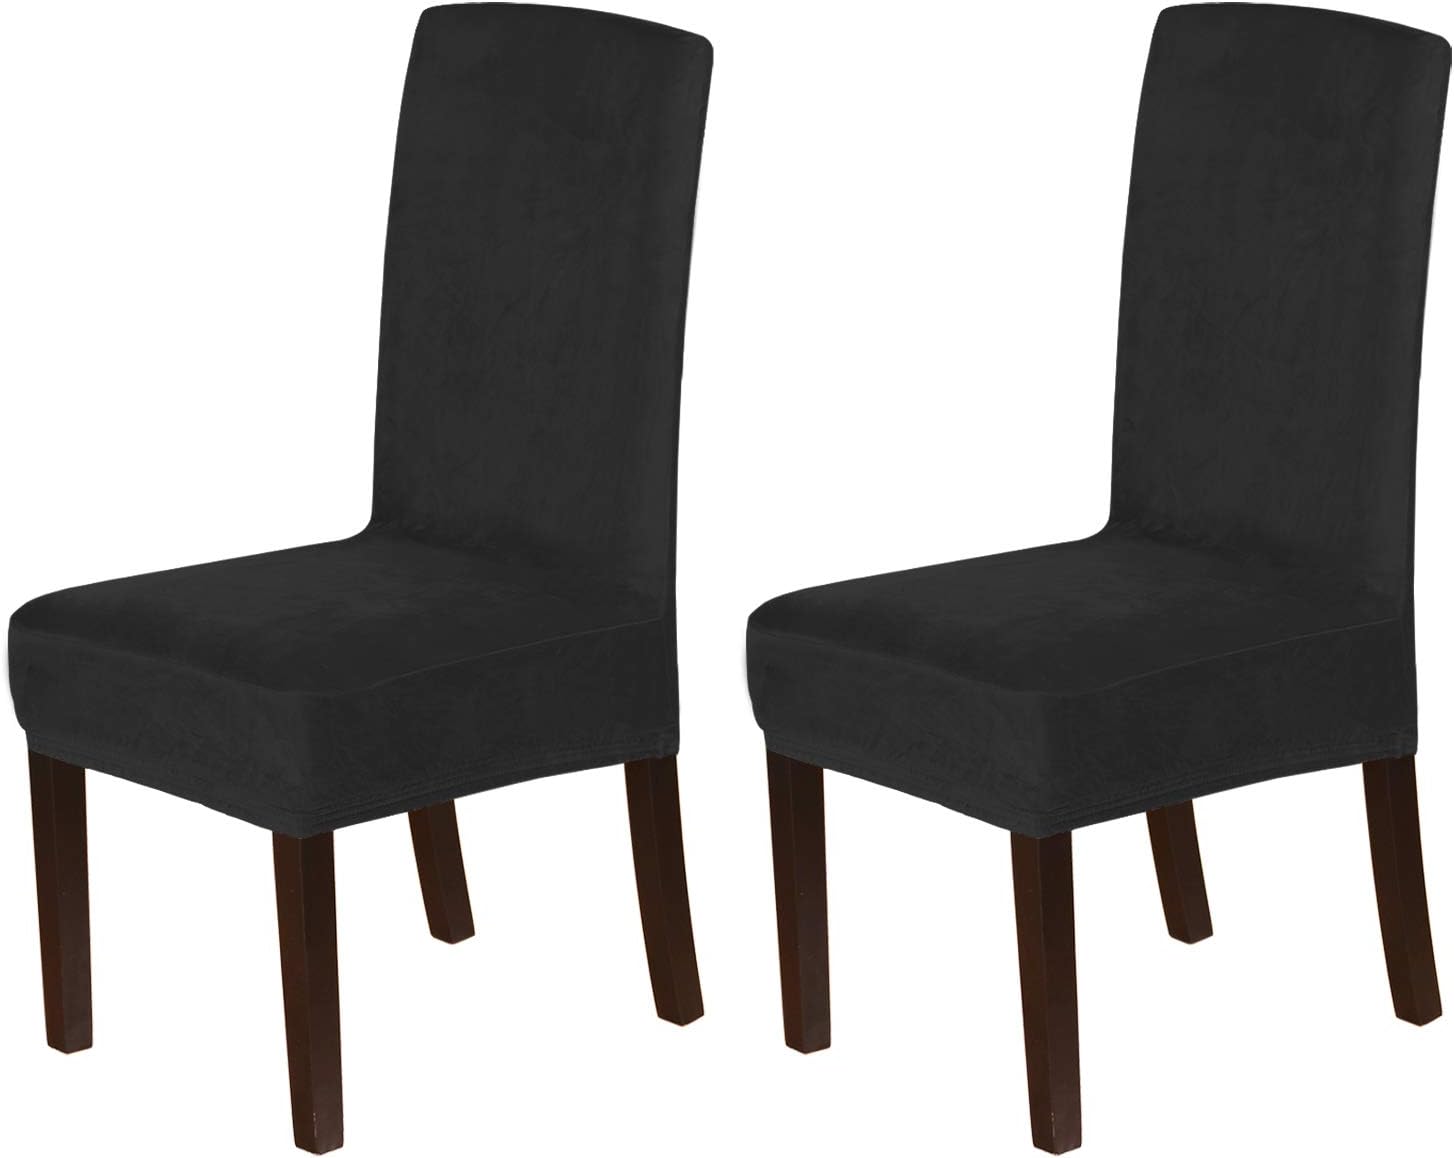 H Versailtex Velvet Dining Chair Covers, Stretch Fabric Dining Chair Covers